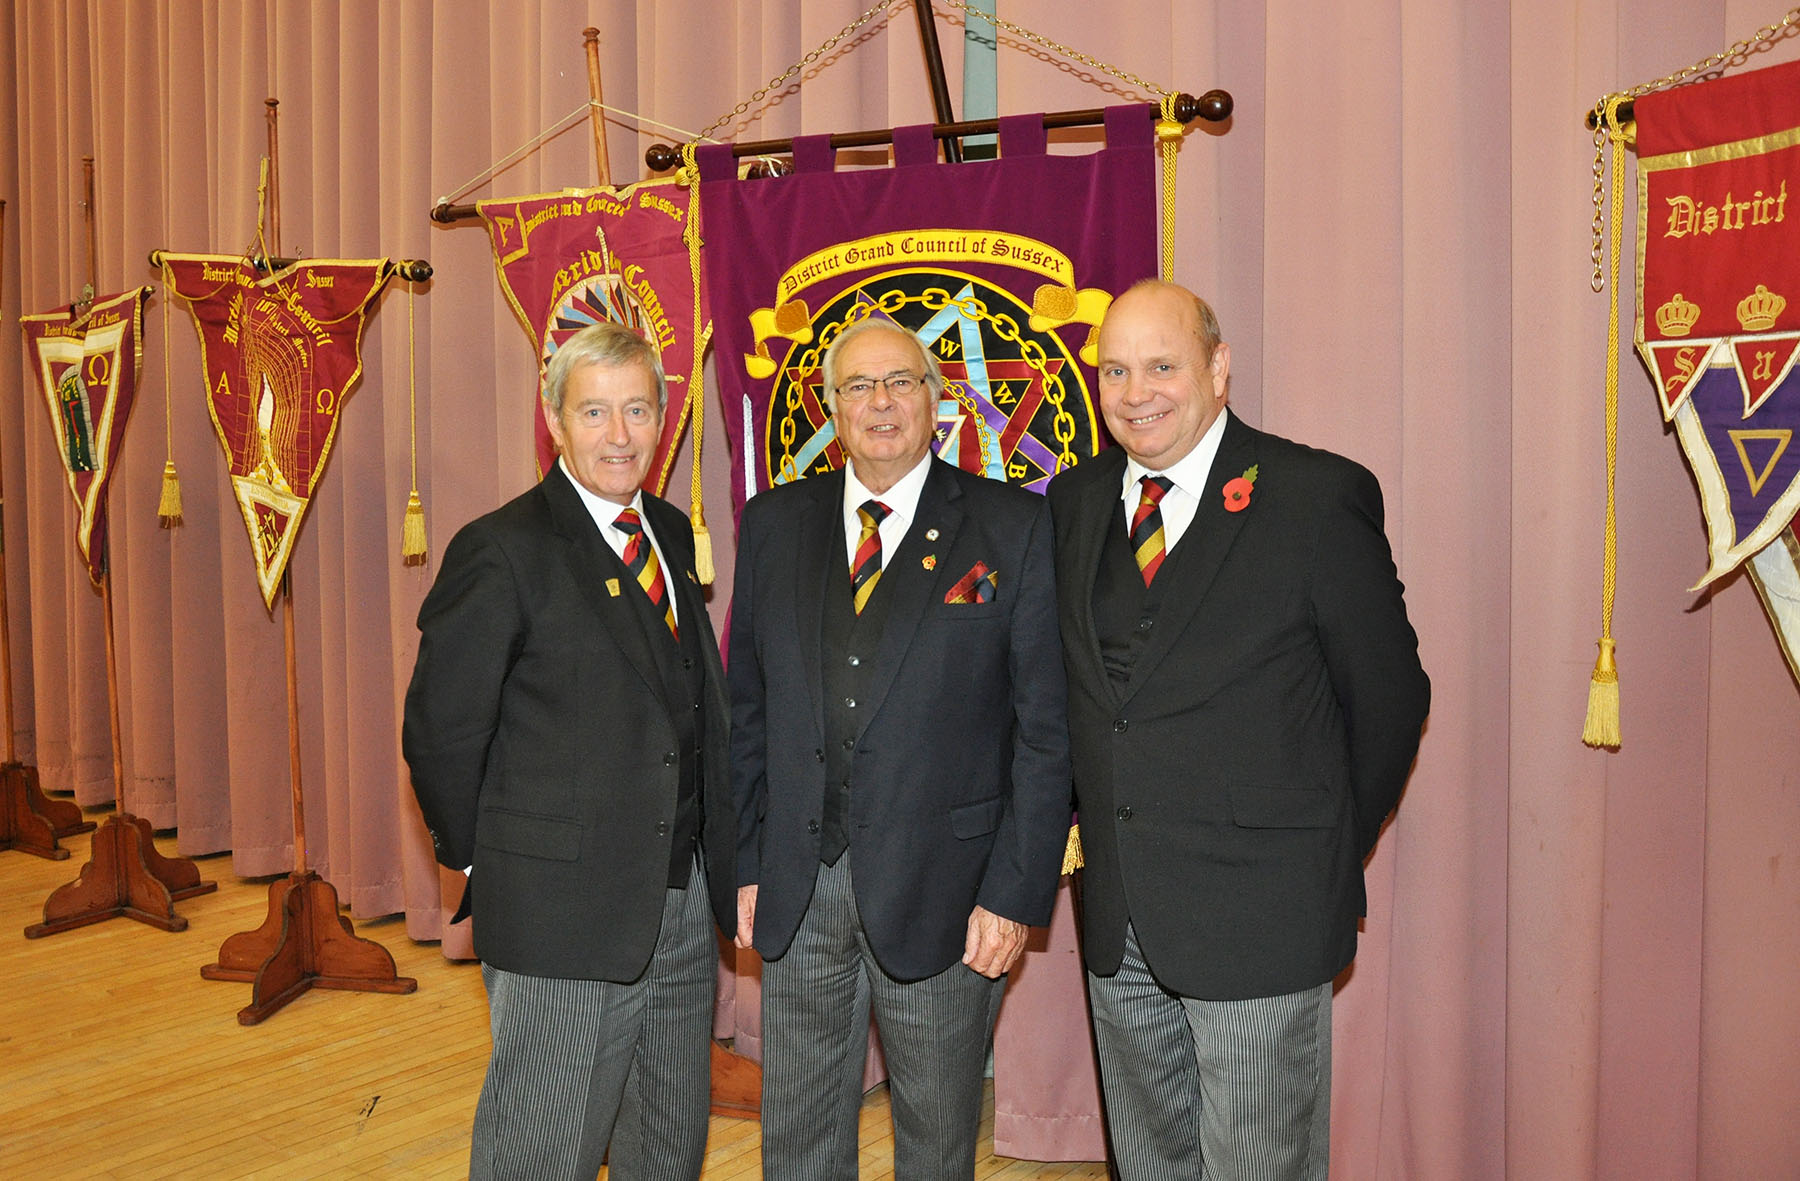 A Visit to the District Grand Council of Sussex